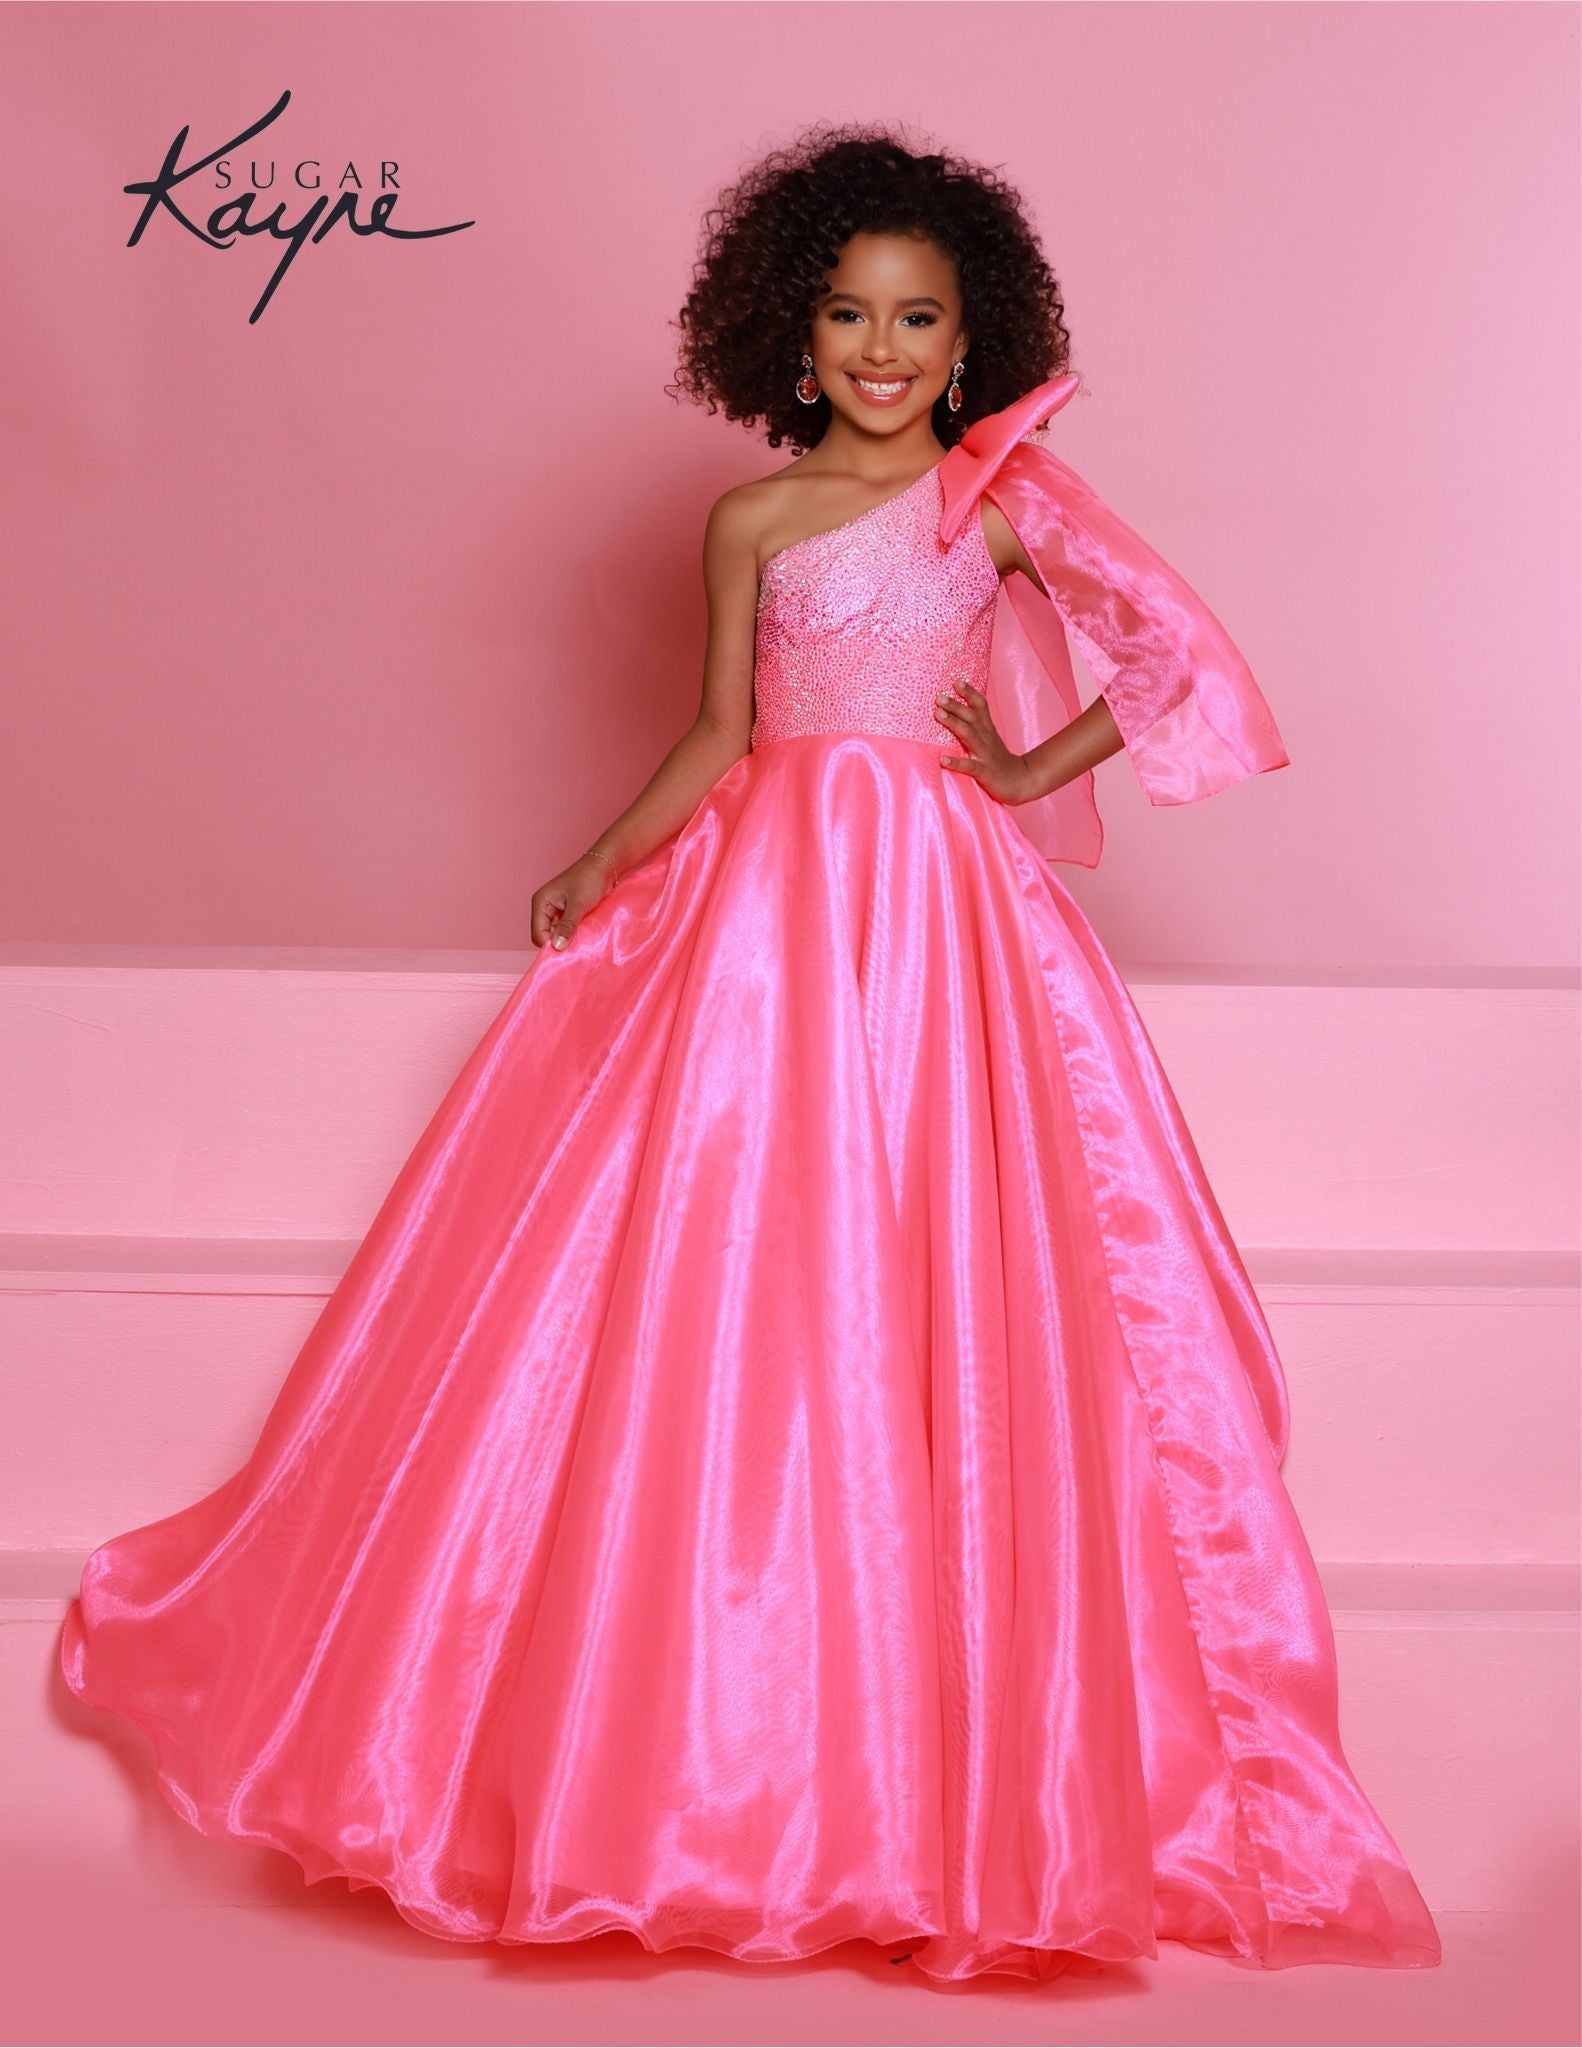 Sugar Kayne C310 Neon Pink Girls and Preteens Pageant Dress Preteens Gown One Shoulder Bow